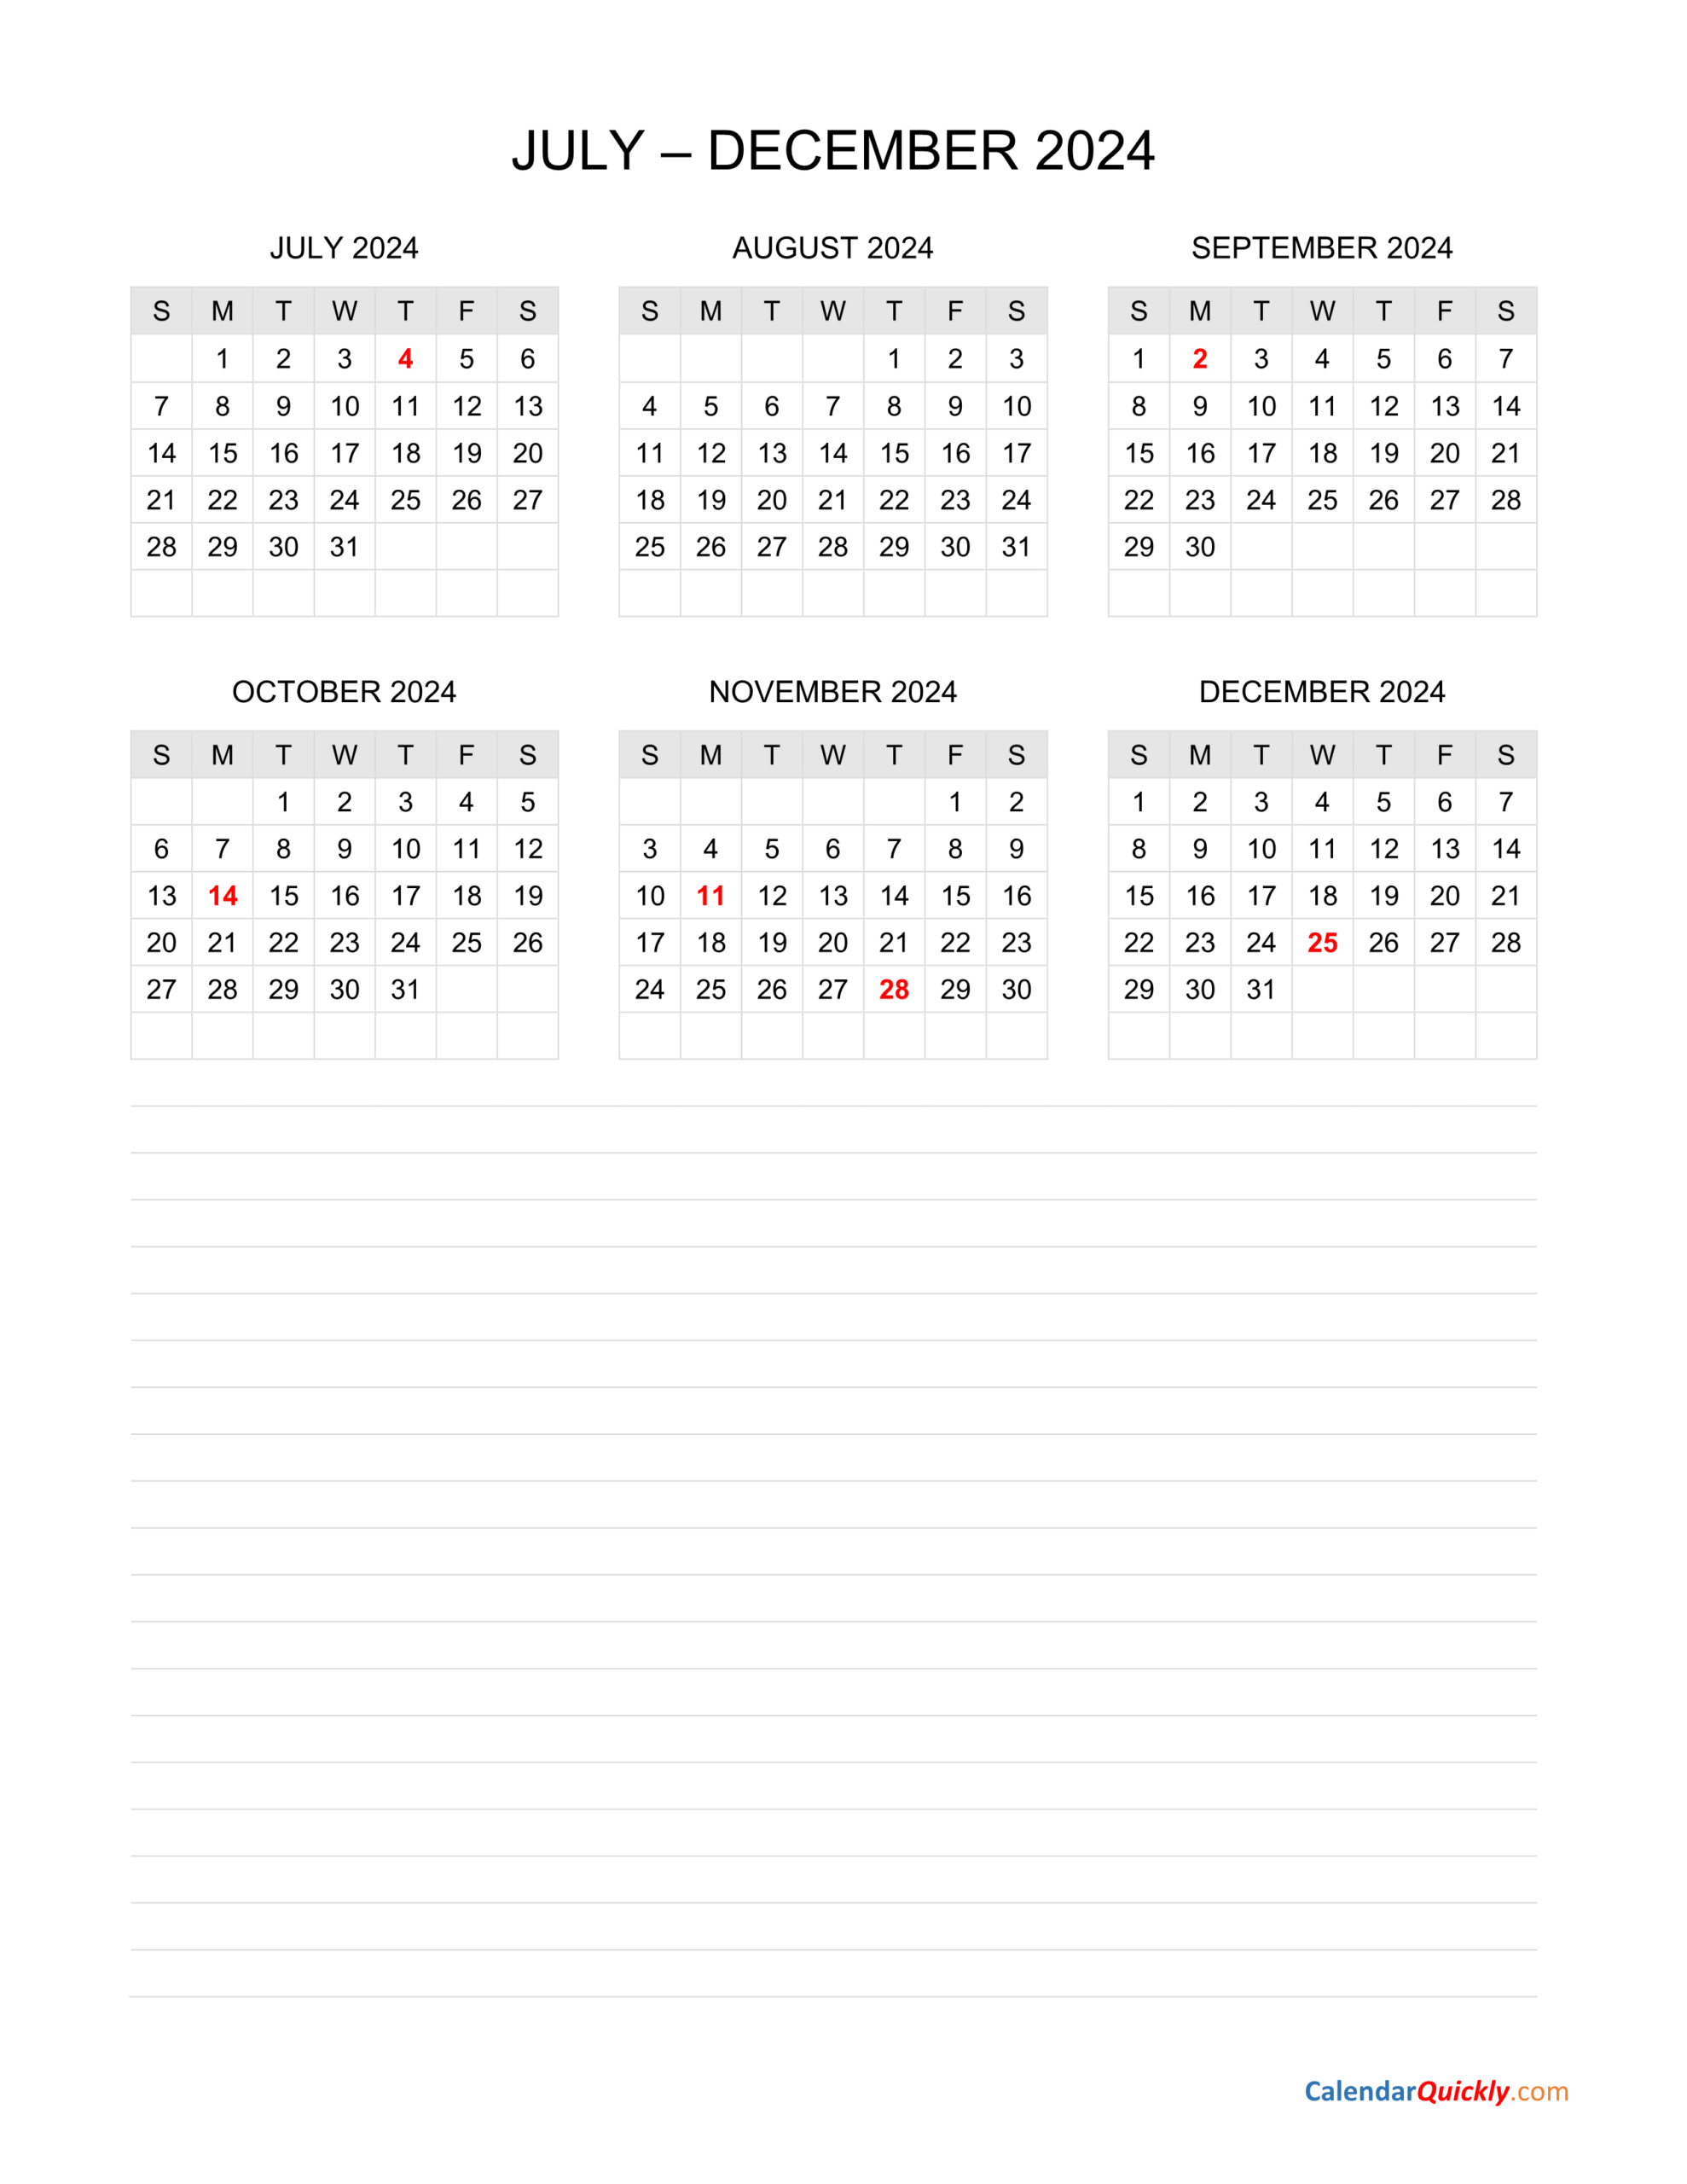 July To December 2024 Calendar With Notes | Calendar Quickly pertaining to Calendar July - December 2024